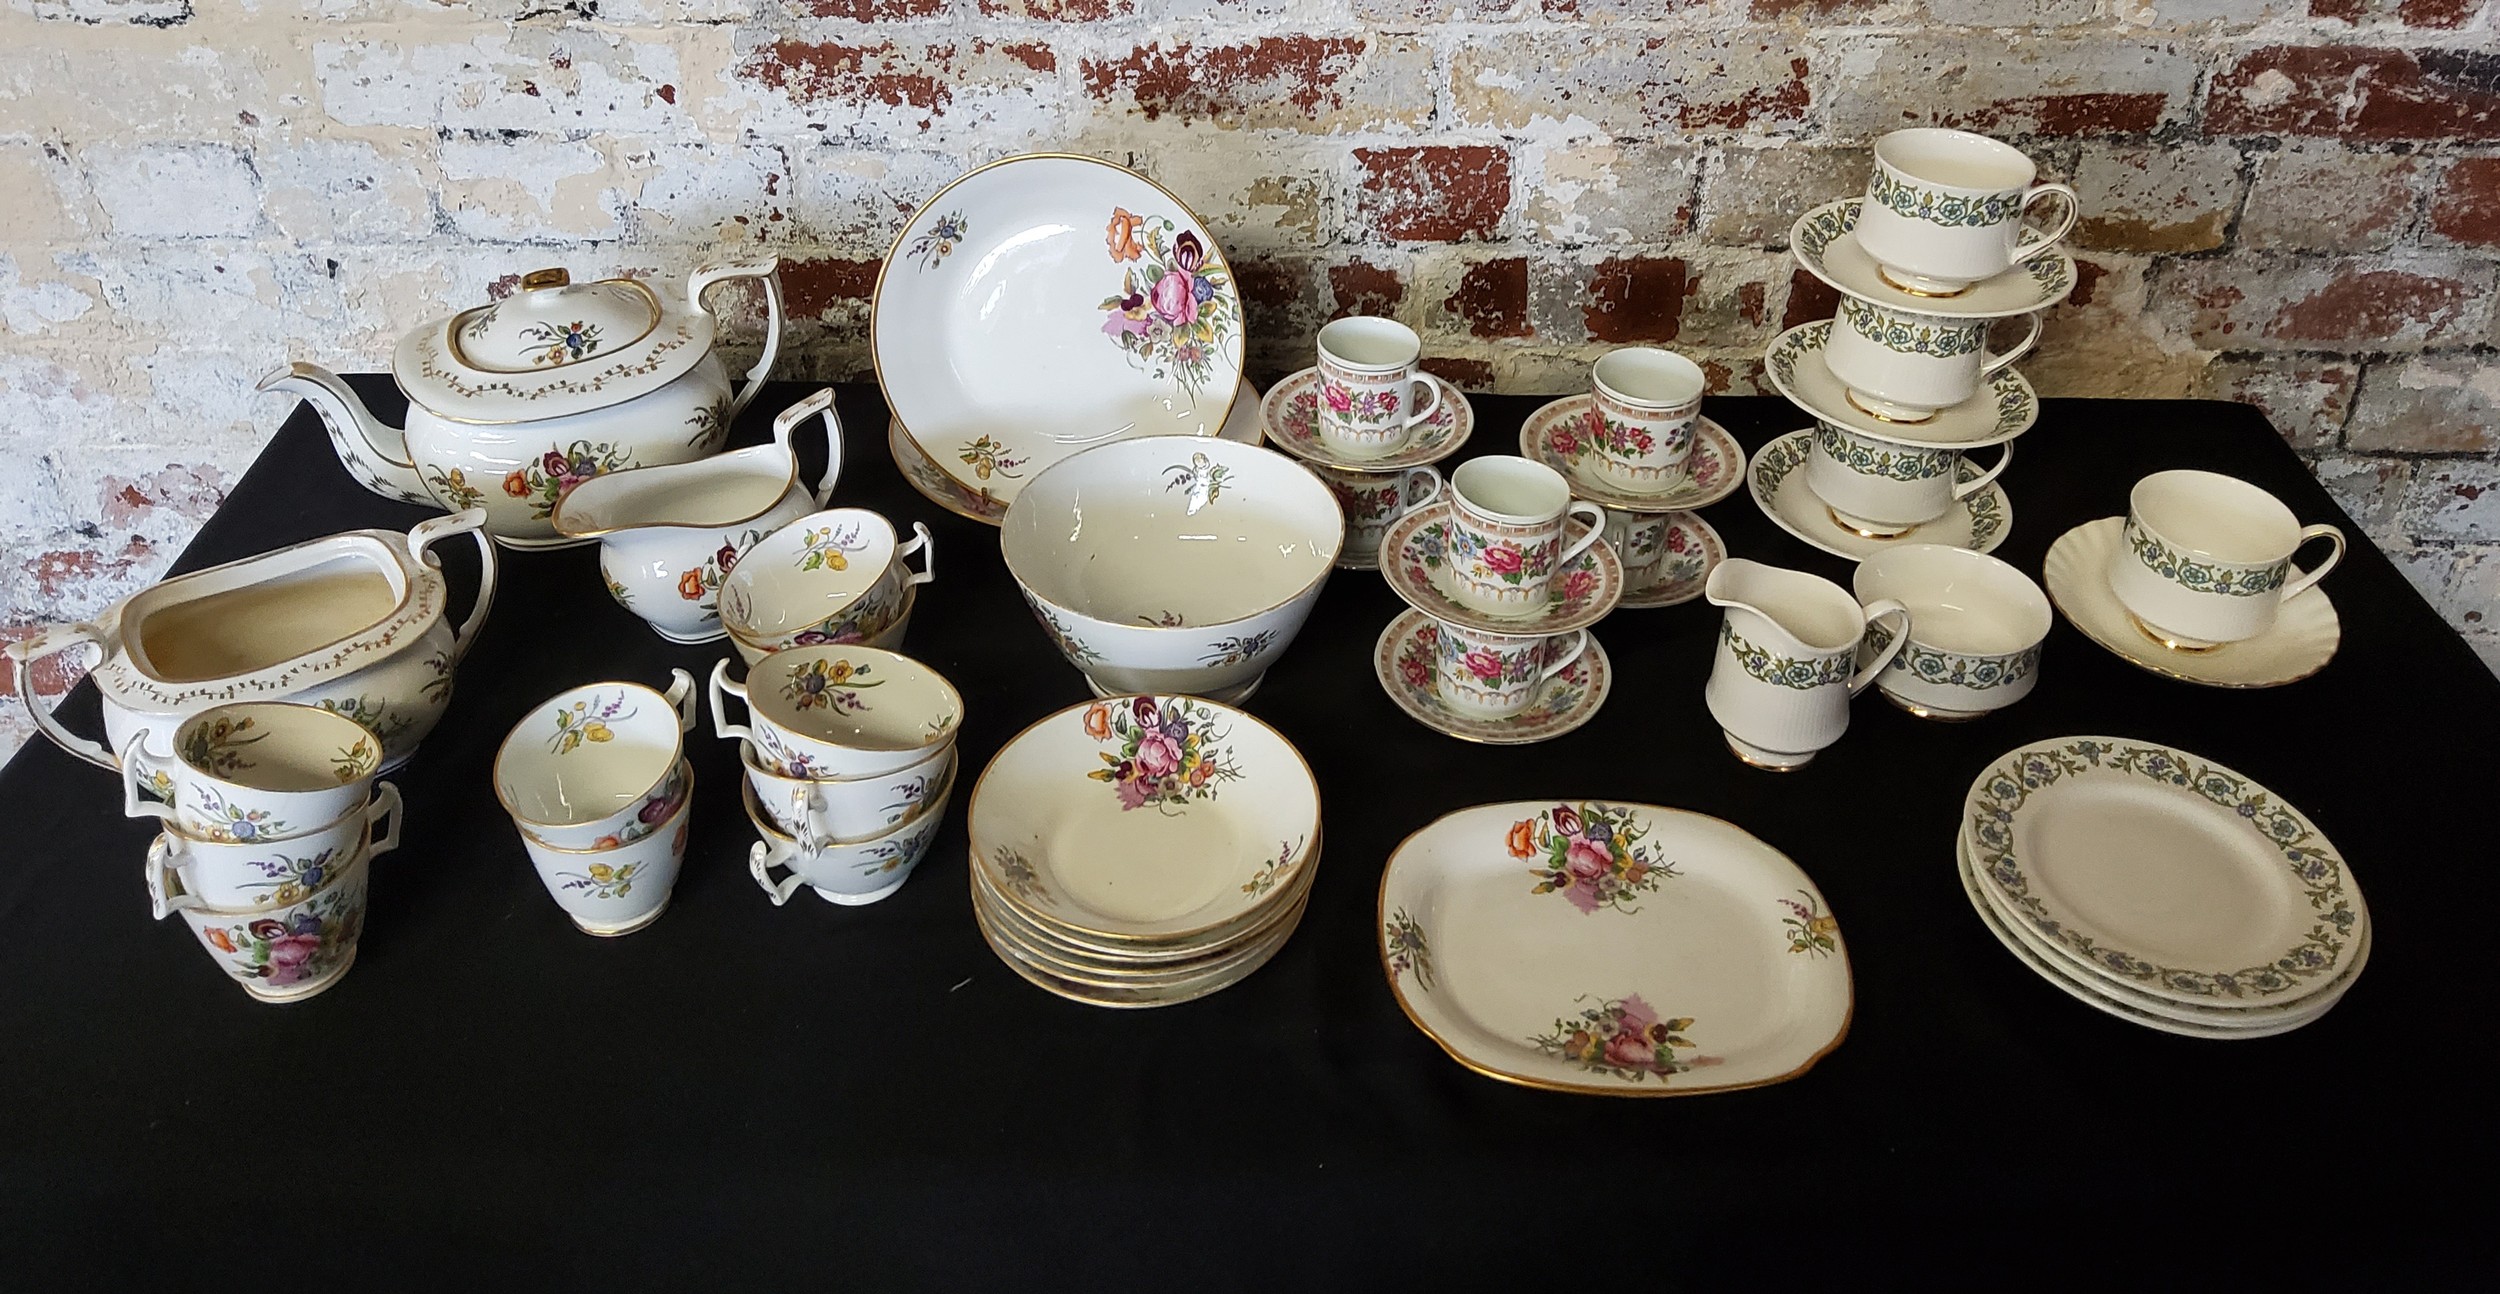 Victorian English tea set, hand painted over transfer with wildflower pattern including 5 tea and